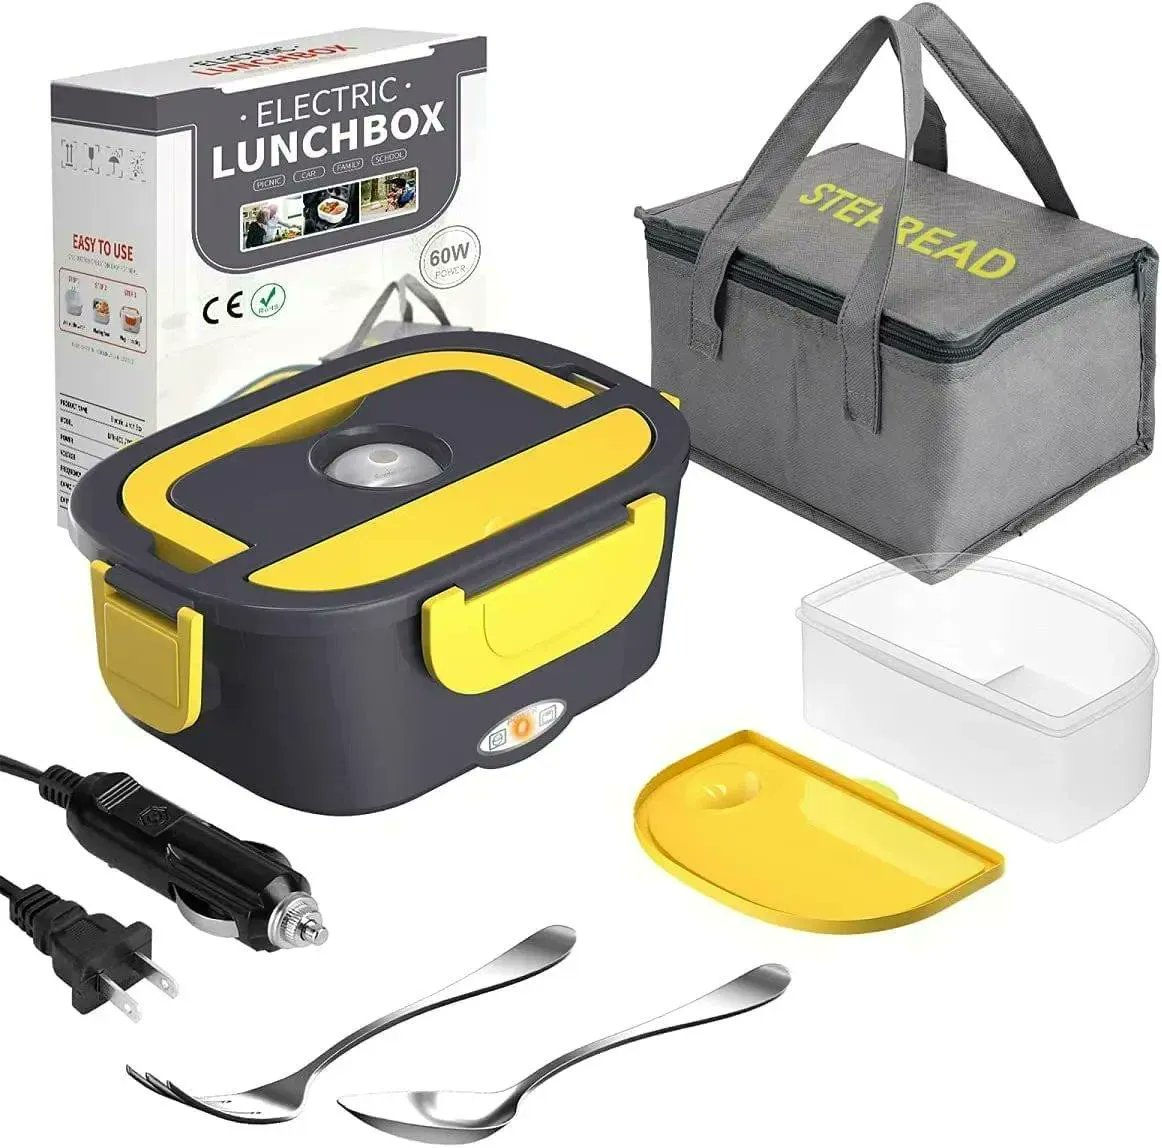 Fat Kid Deals on X: Electric Food Warmer Lunch Box for $16.99